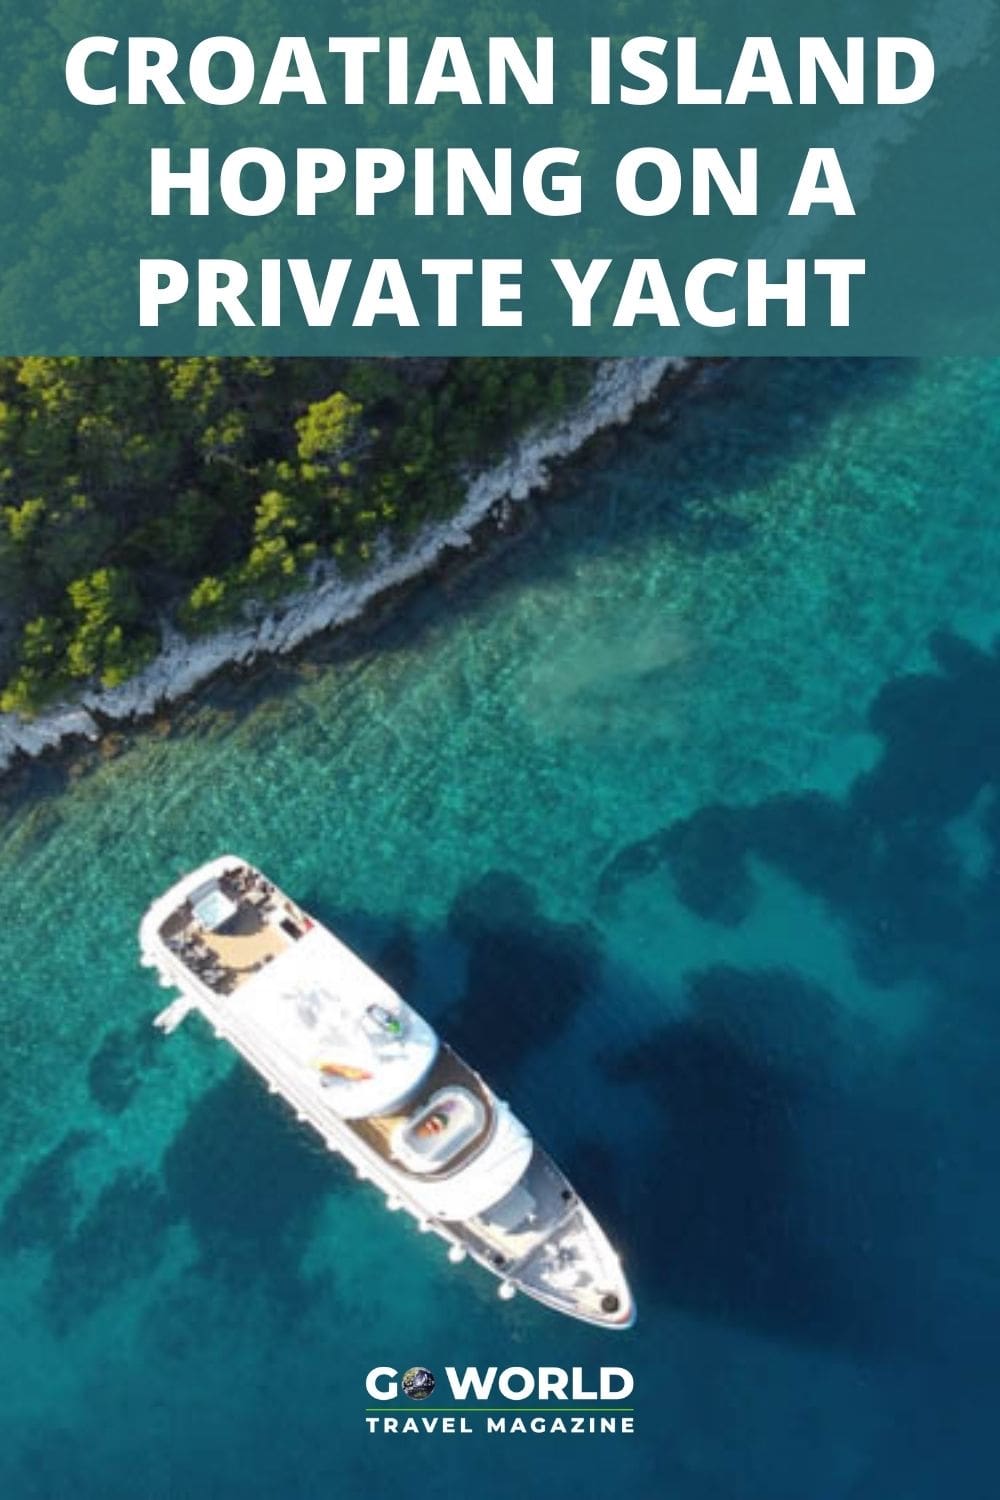 One of the best ways to explore the beautiful Croatian islands is by boat. Goolets offers private crewed yacht charters at all price points. #croatianislands #sailingcroatia